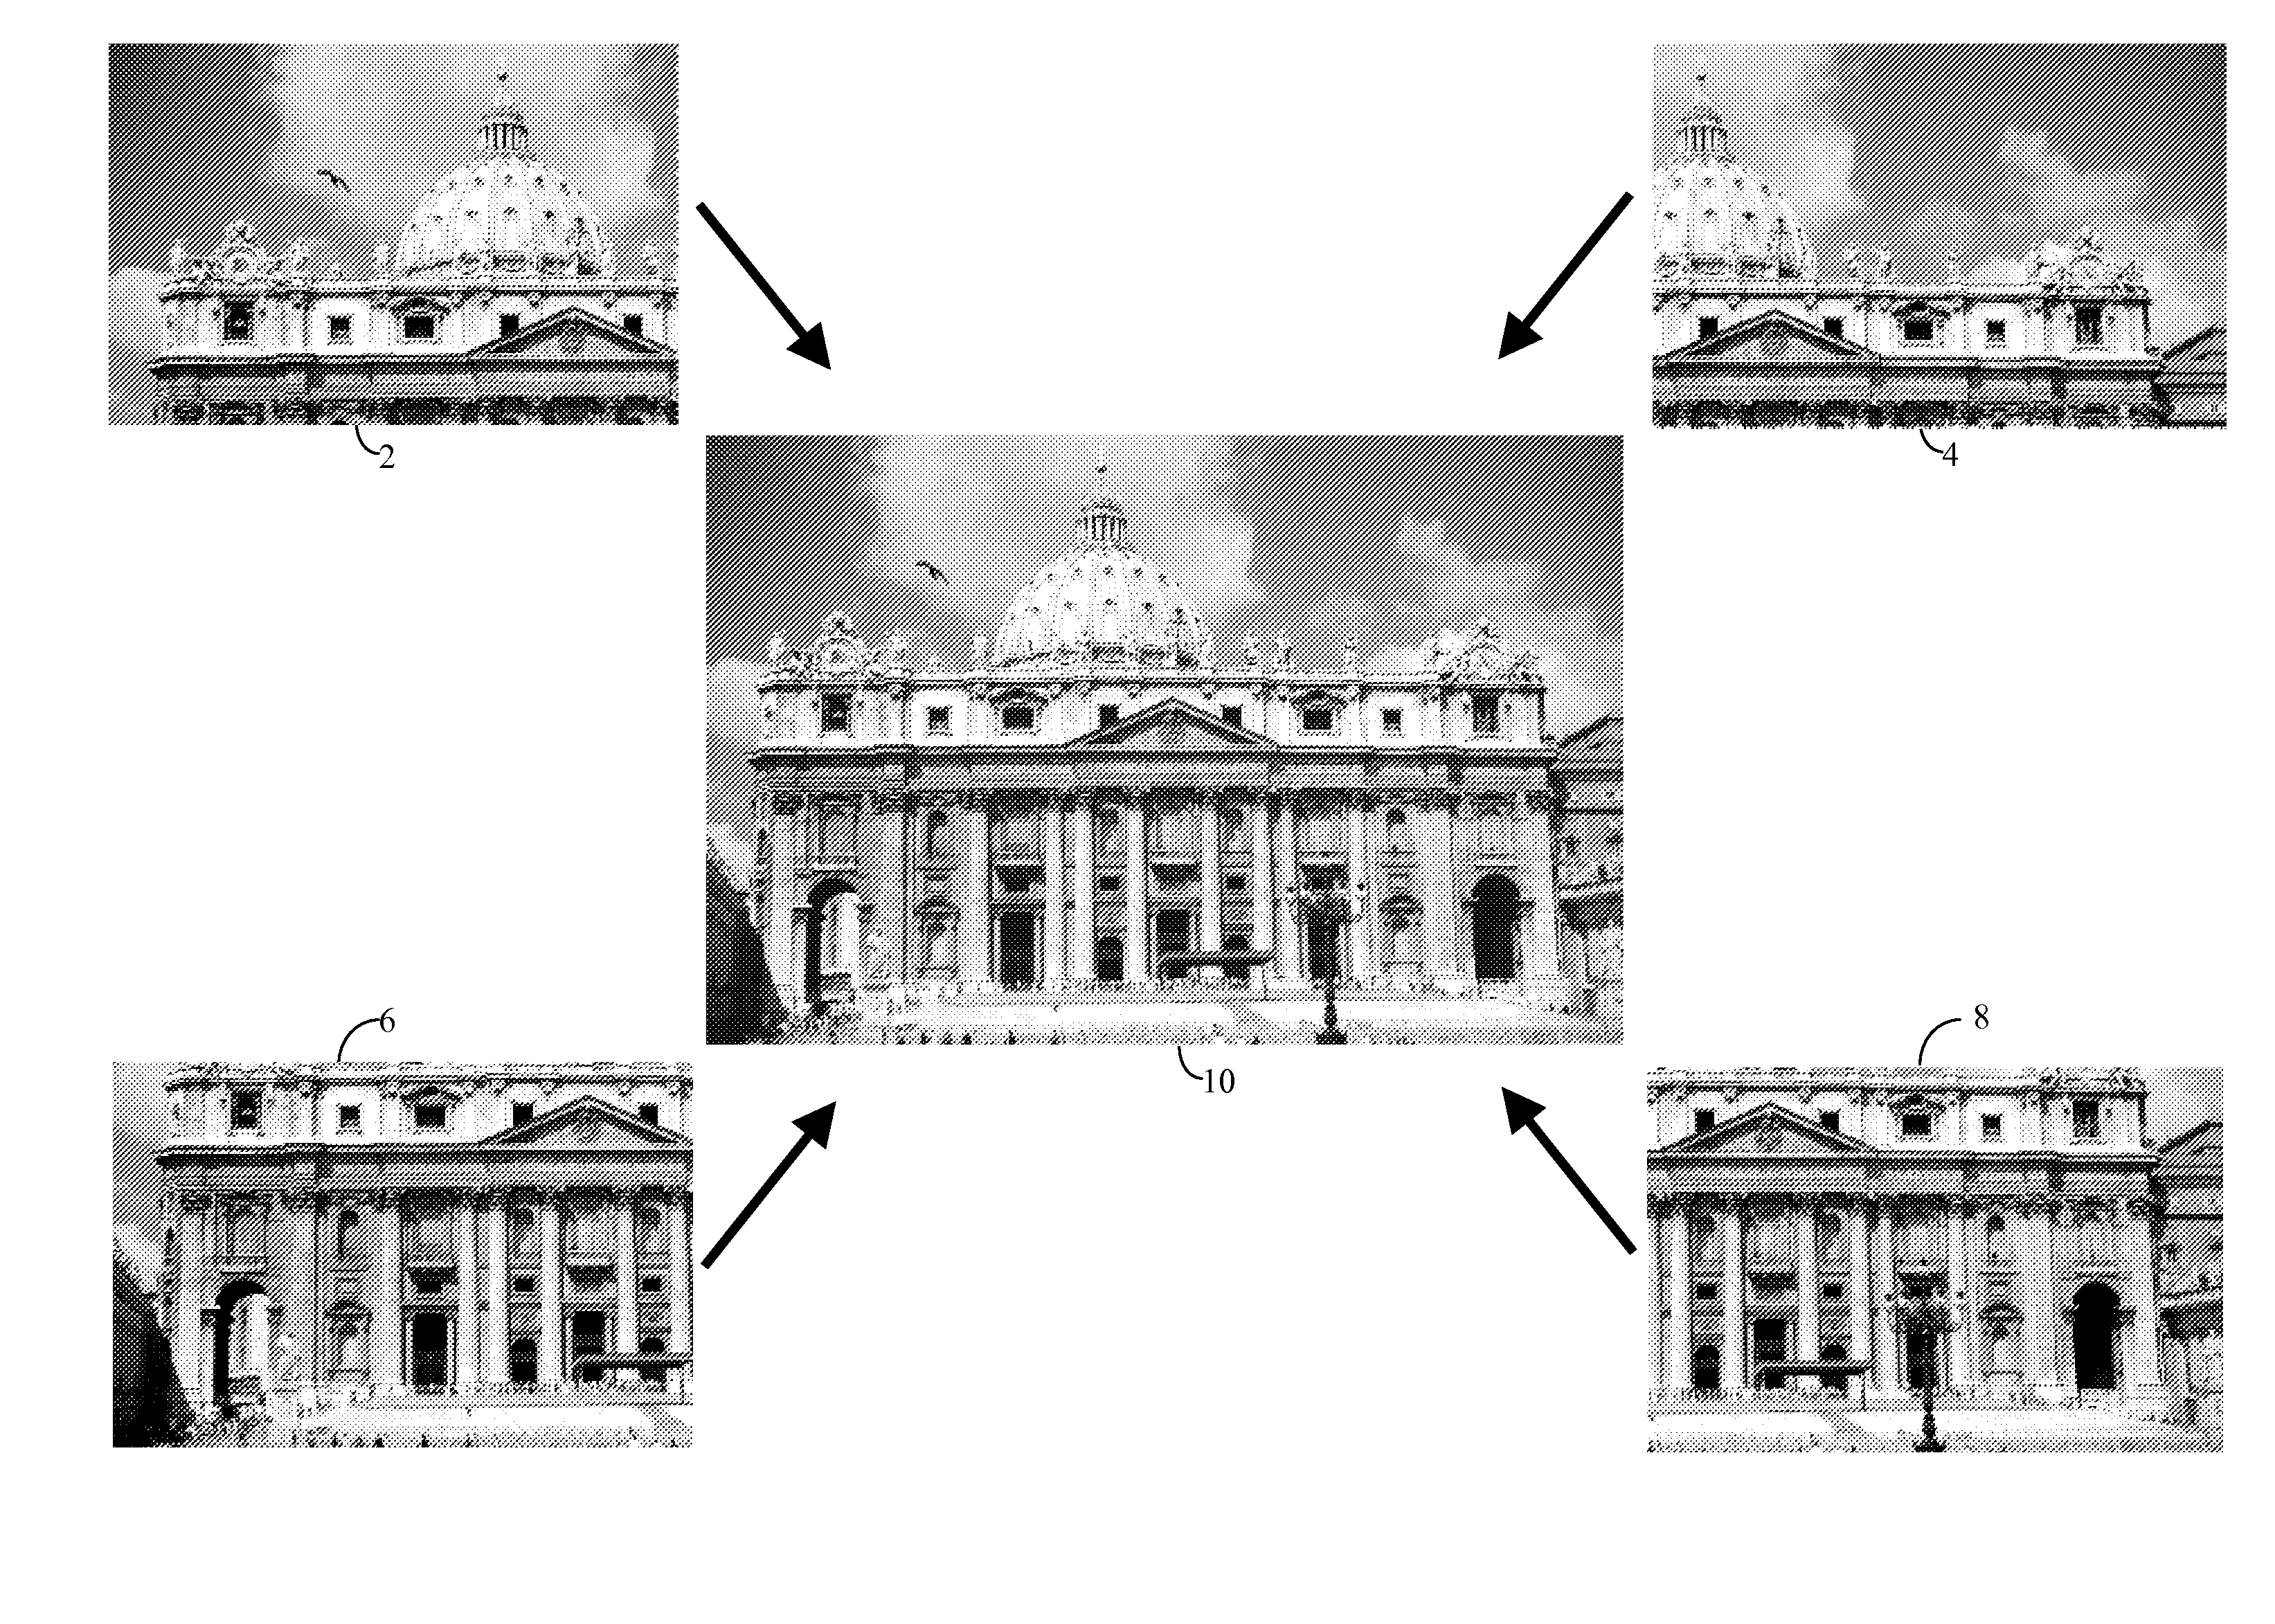 Context and Epsilon Stereo Constrained Correspondence Matching